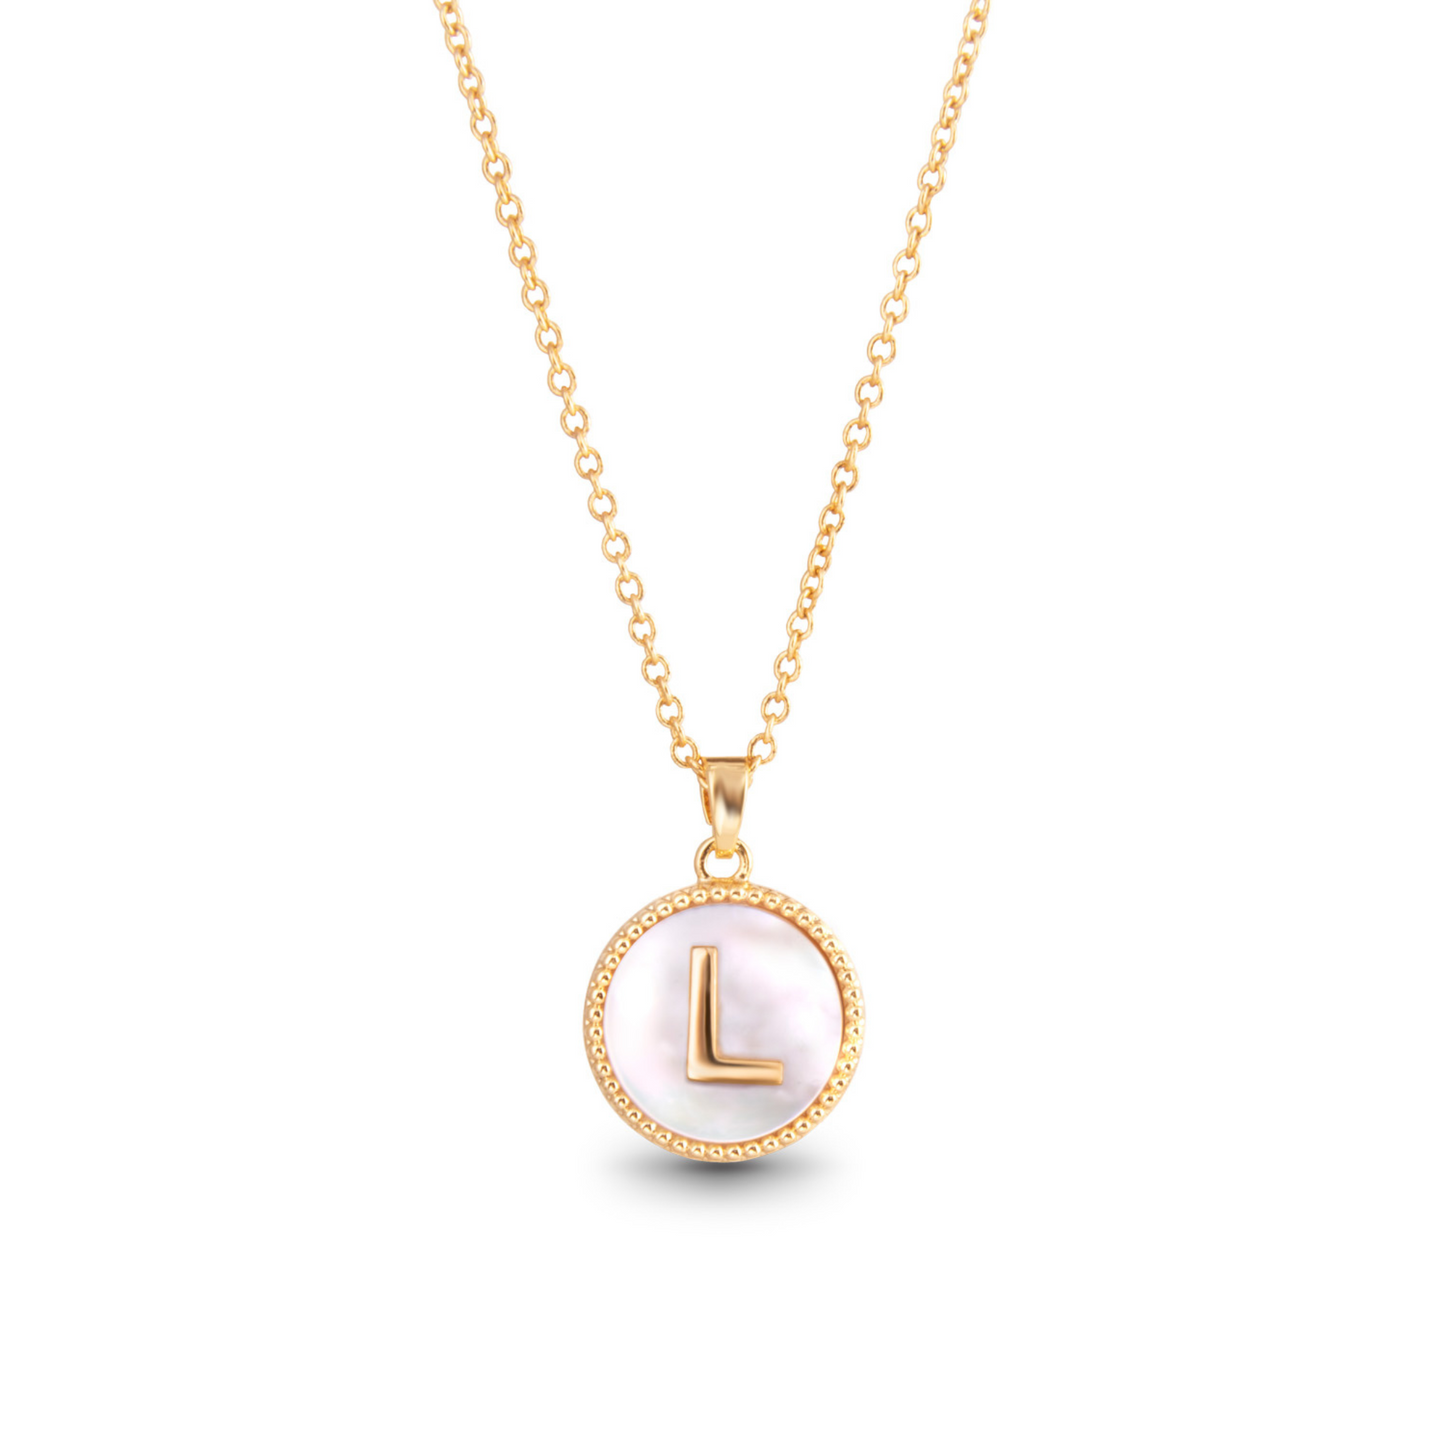 Gold mother of pearl initial necklace (L)